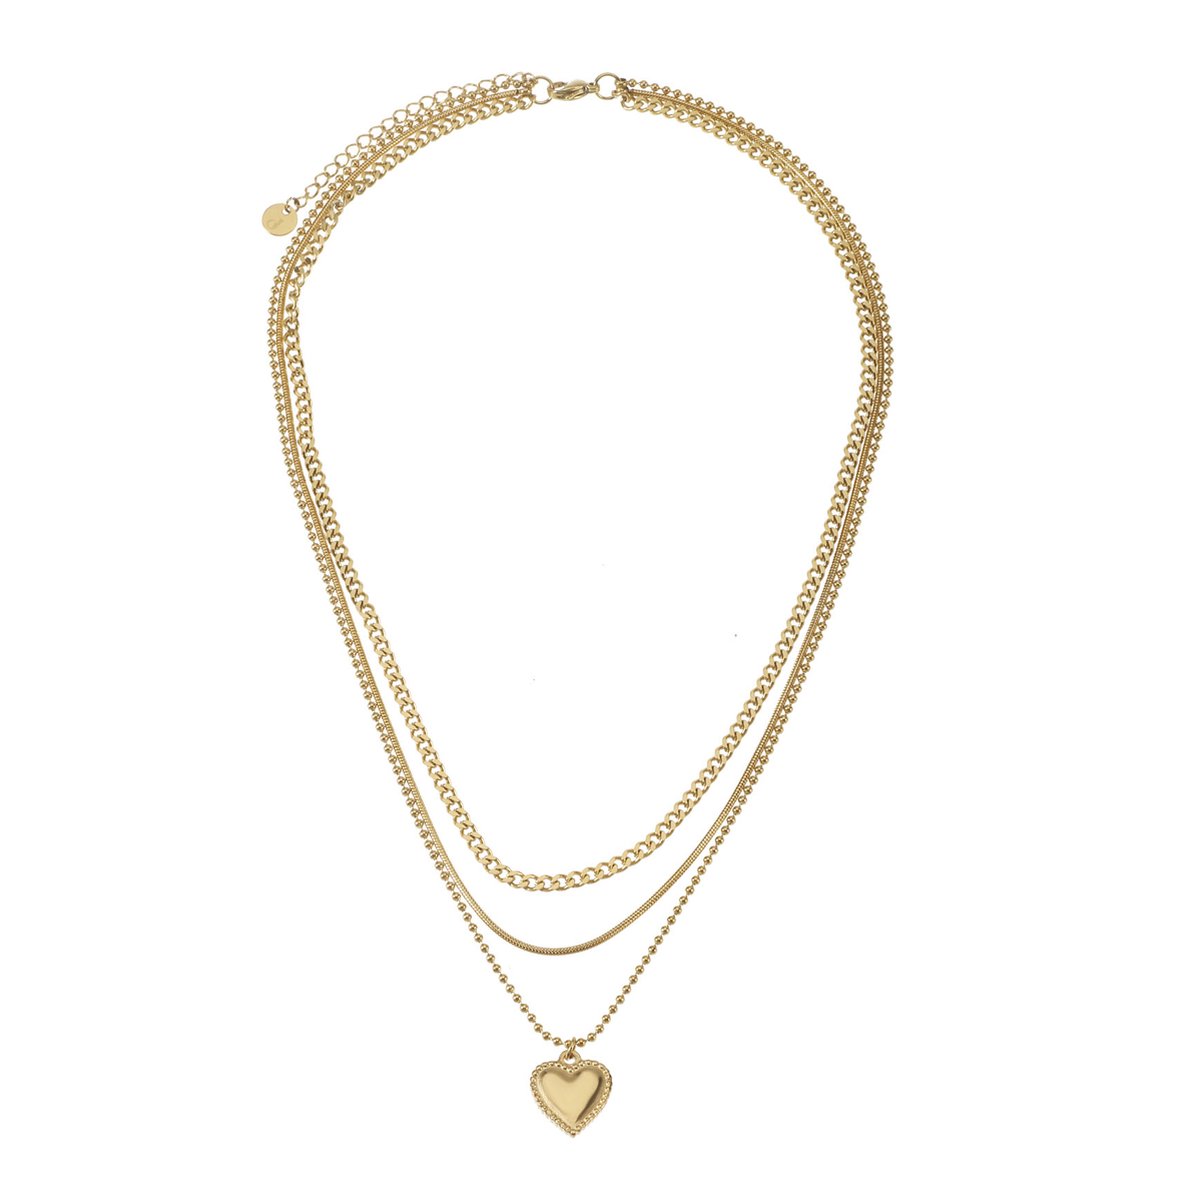 The Jewellery Club - Triple layer heart necklace gold gold - Collier - Vrouwen ketting - Goud - Stainless steel - Layer - Hart - 38 cm, 40 cm en 43 cm